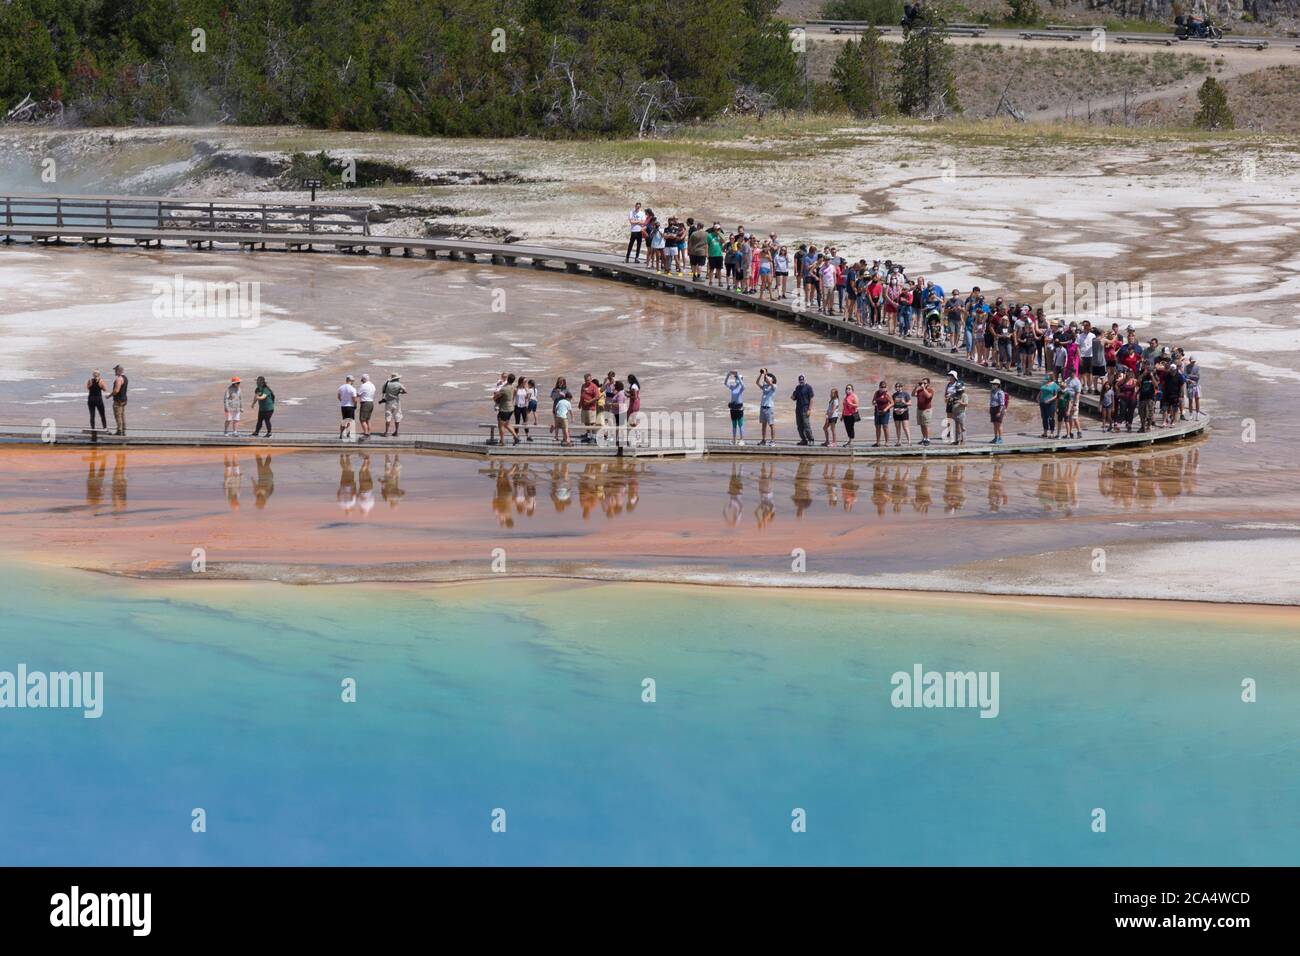 Visitors walk along the boardwalk at Grand Prismatic Spring on Monday, August 3, 2020. Many of the parks boardwalk have been made one-way in order to combat the transmission of the COVID-19 virus. The park recently reported several positive cases of the COVID-19 virus among visitors and concessioners. Stock Photo